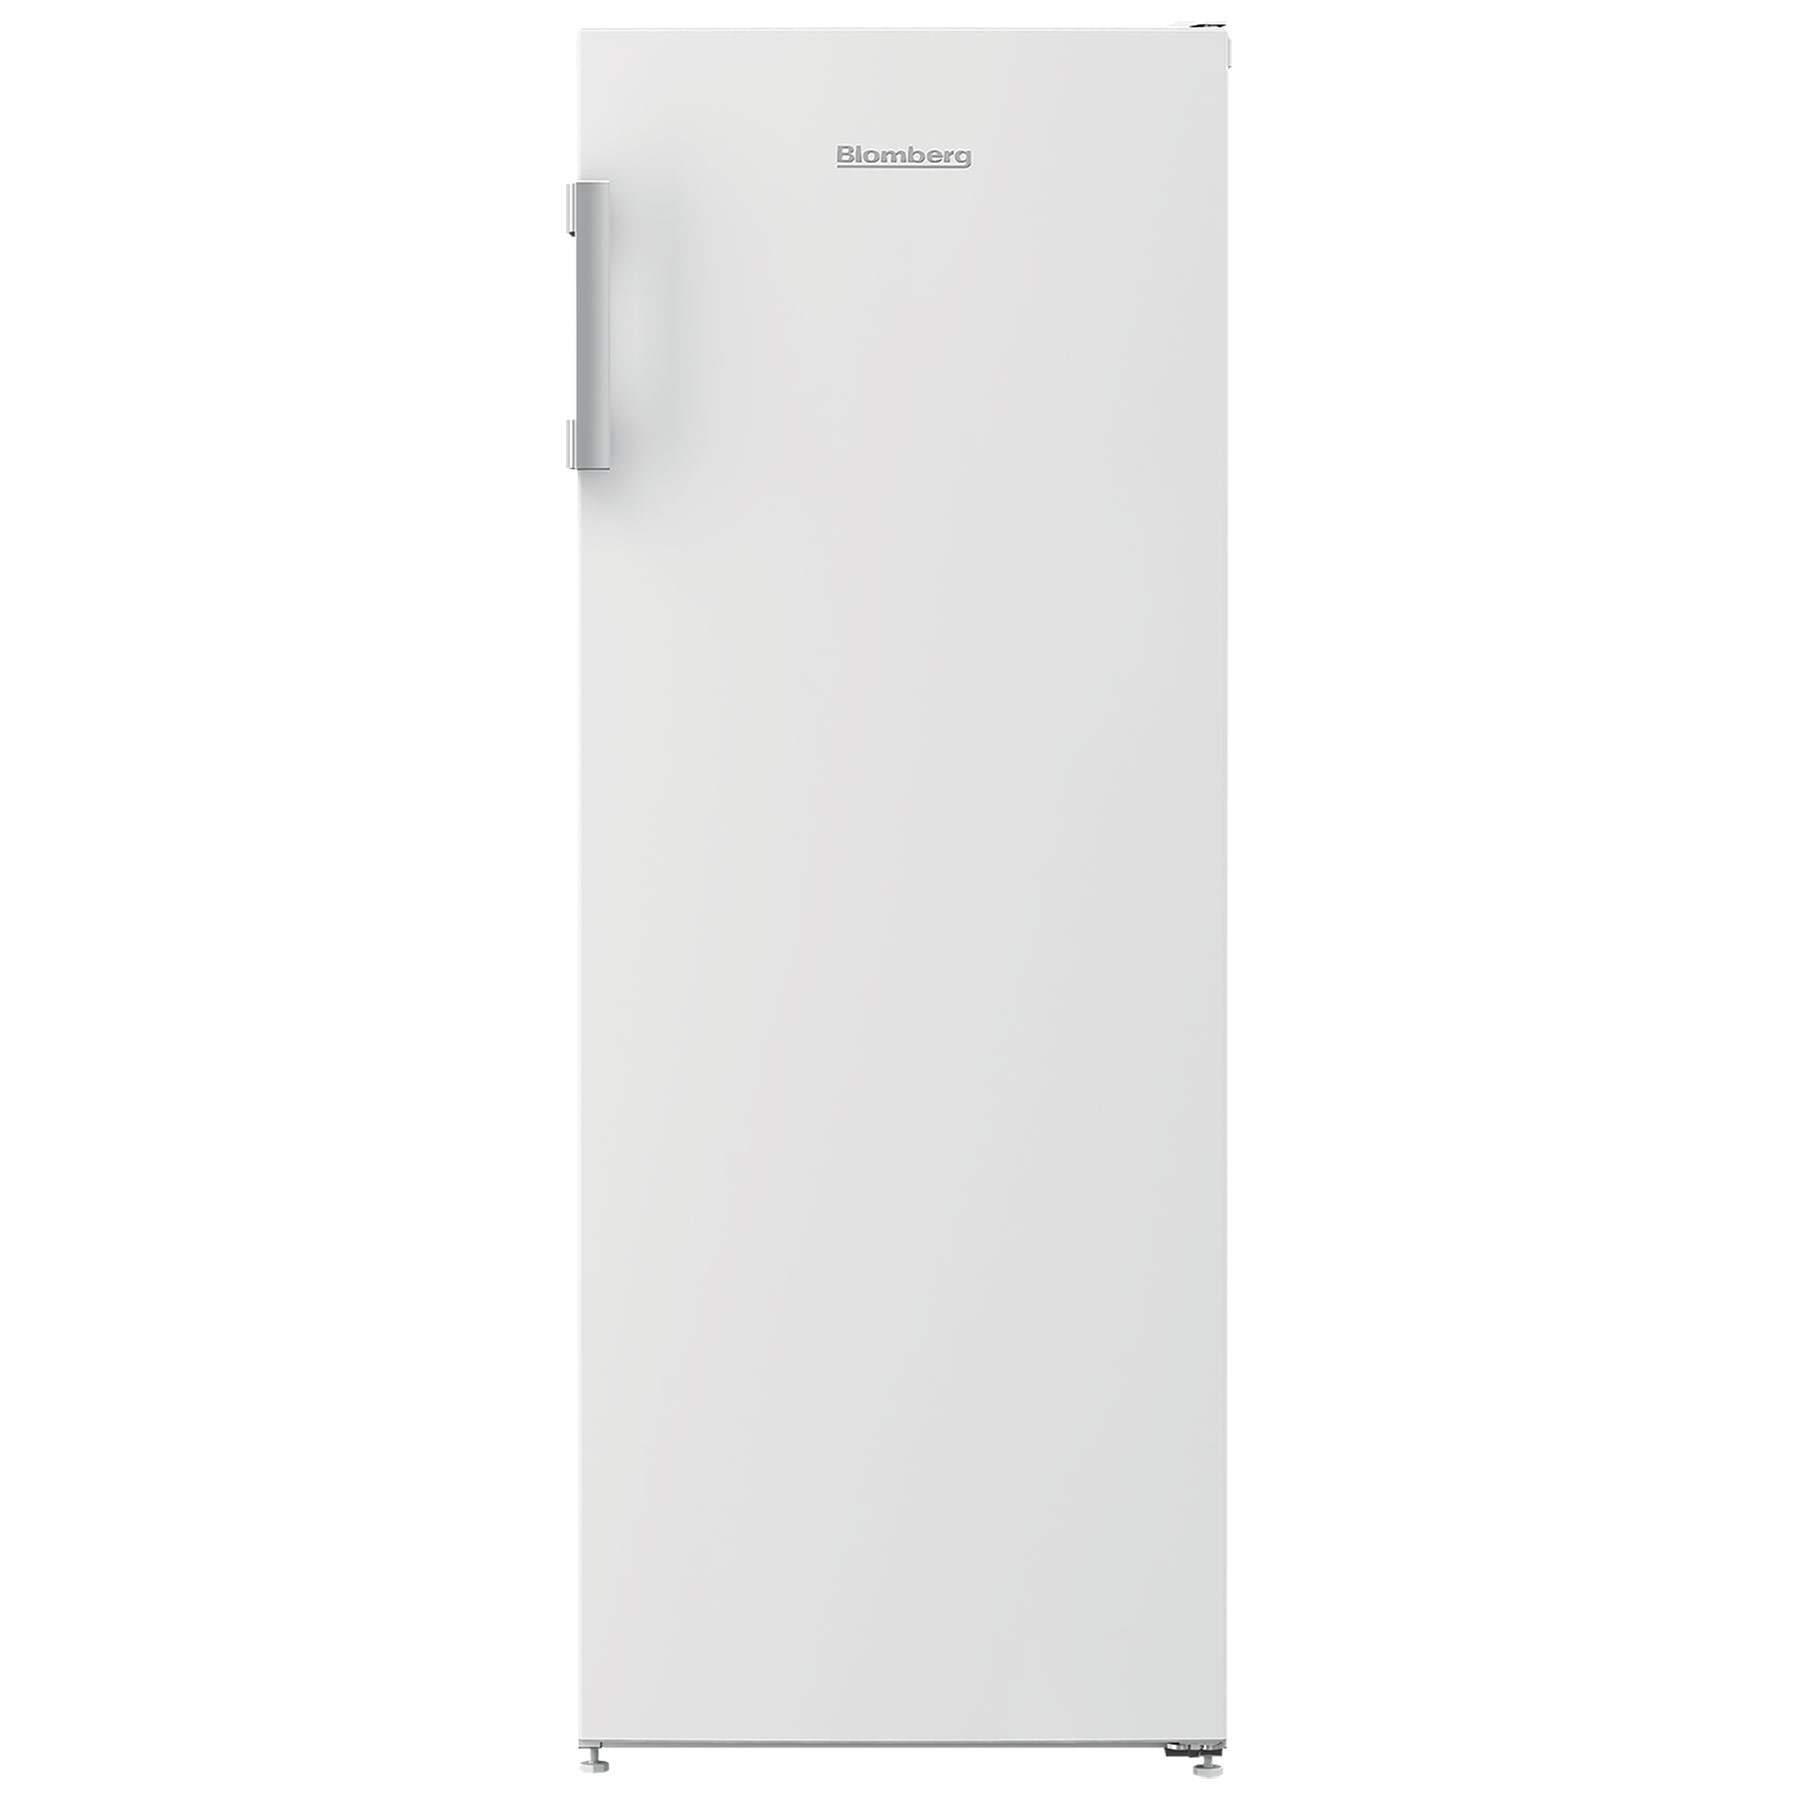 Image of Blomberg FNT44550 55cm Tall Frost Free Freezer White 1 46m E Rated 177